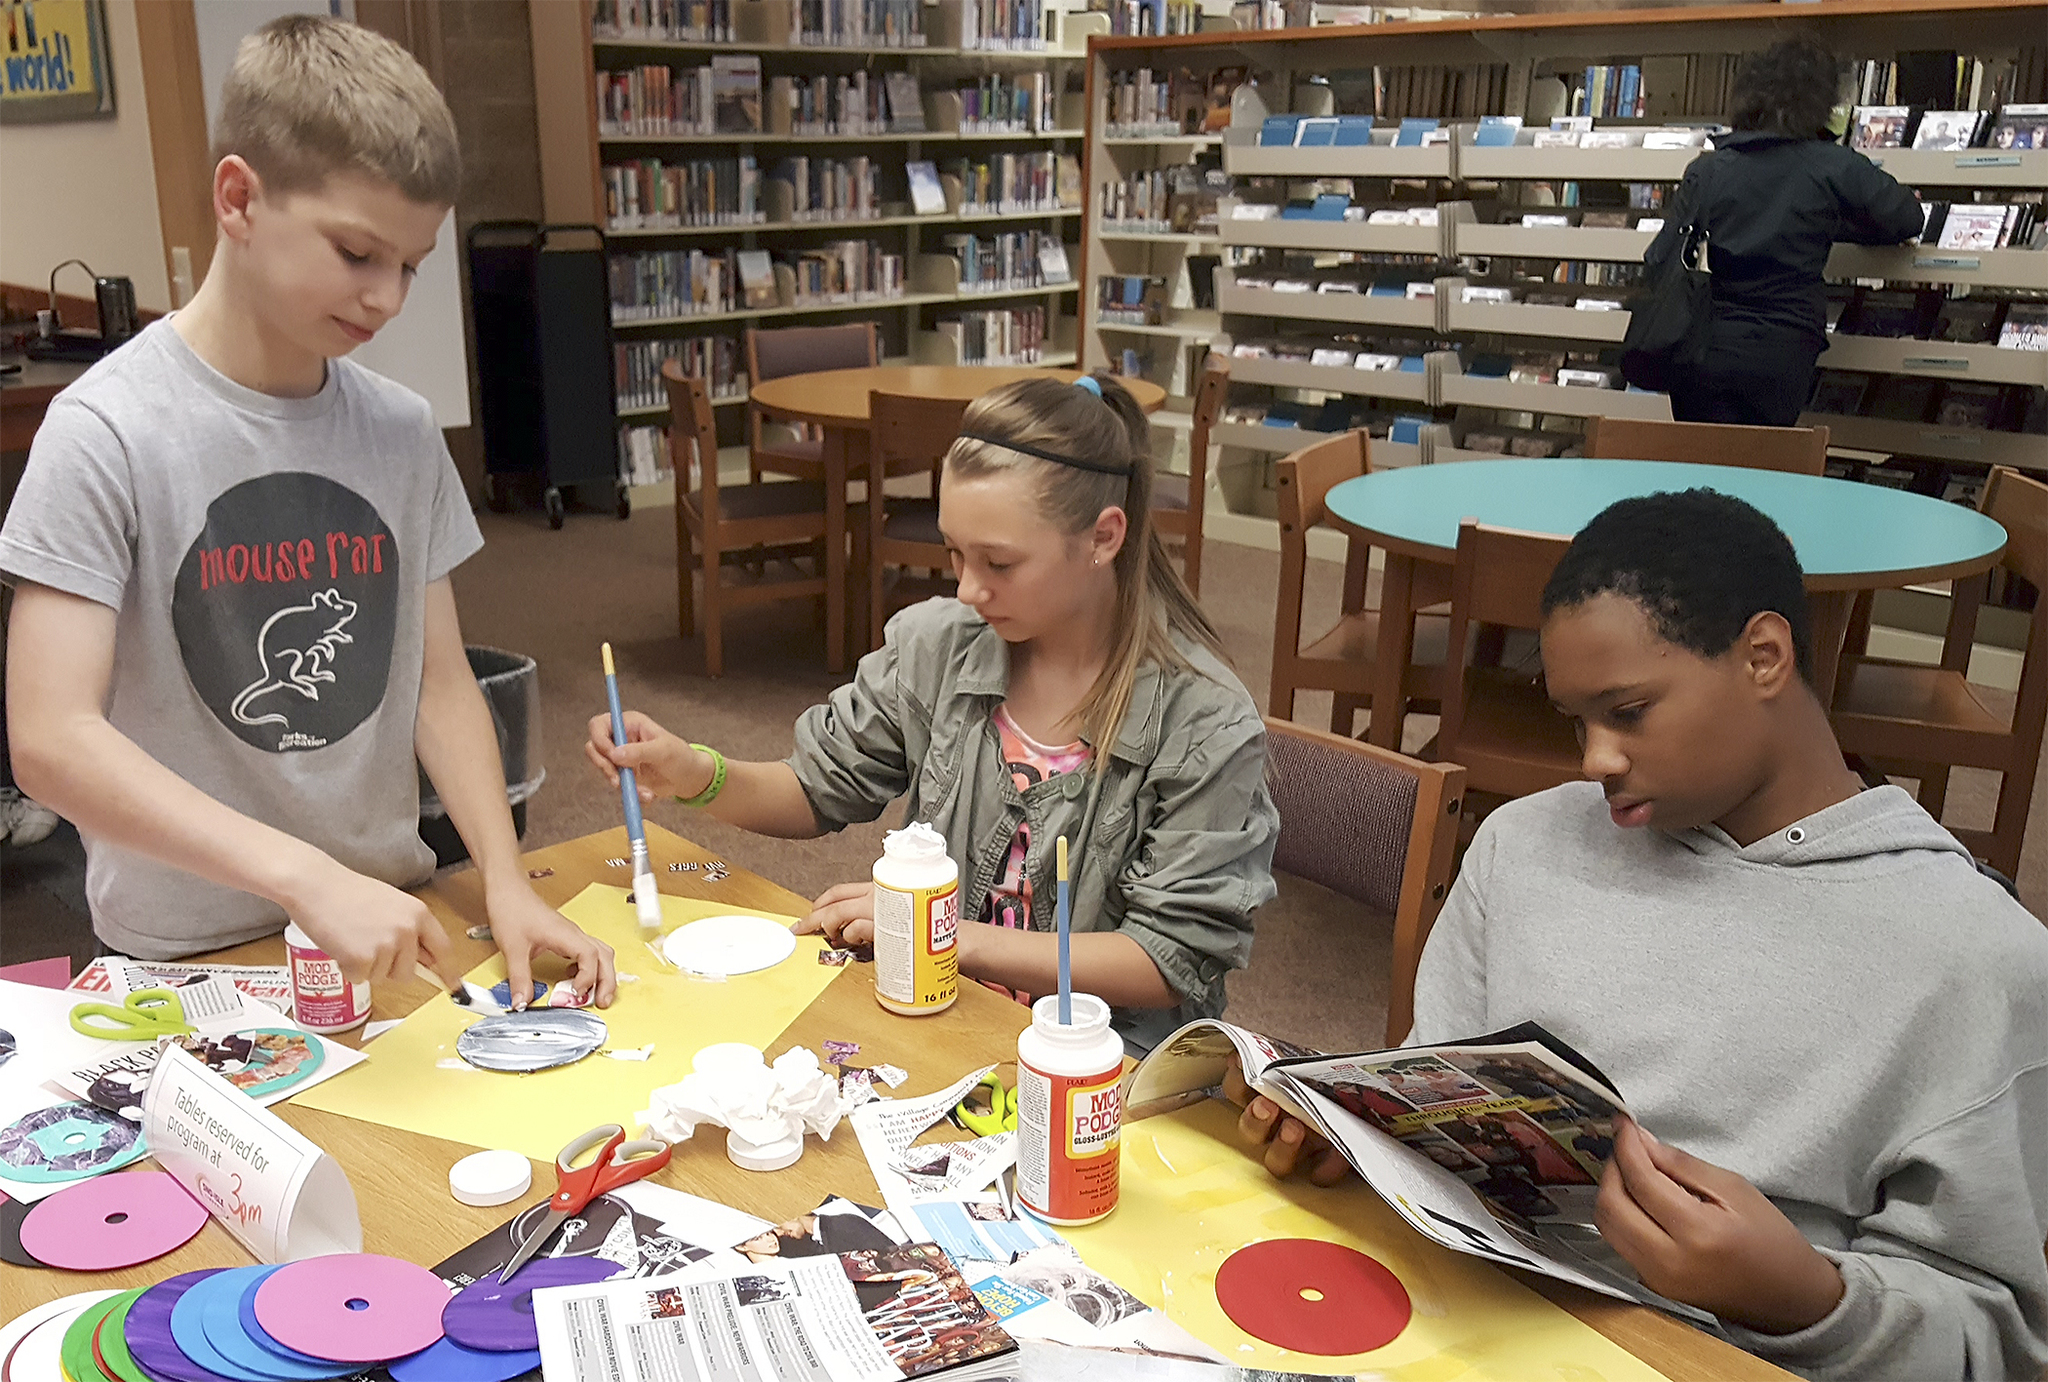 Teens participate in a craft program at the Arlington Library recently. More events are planned for teens and younger children at the library this summer.